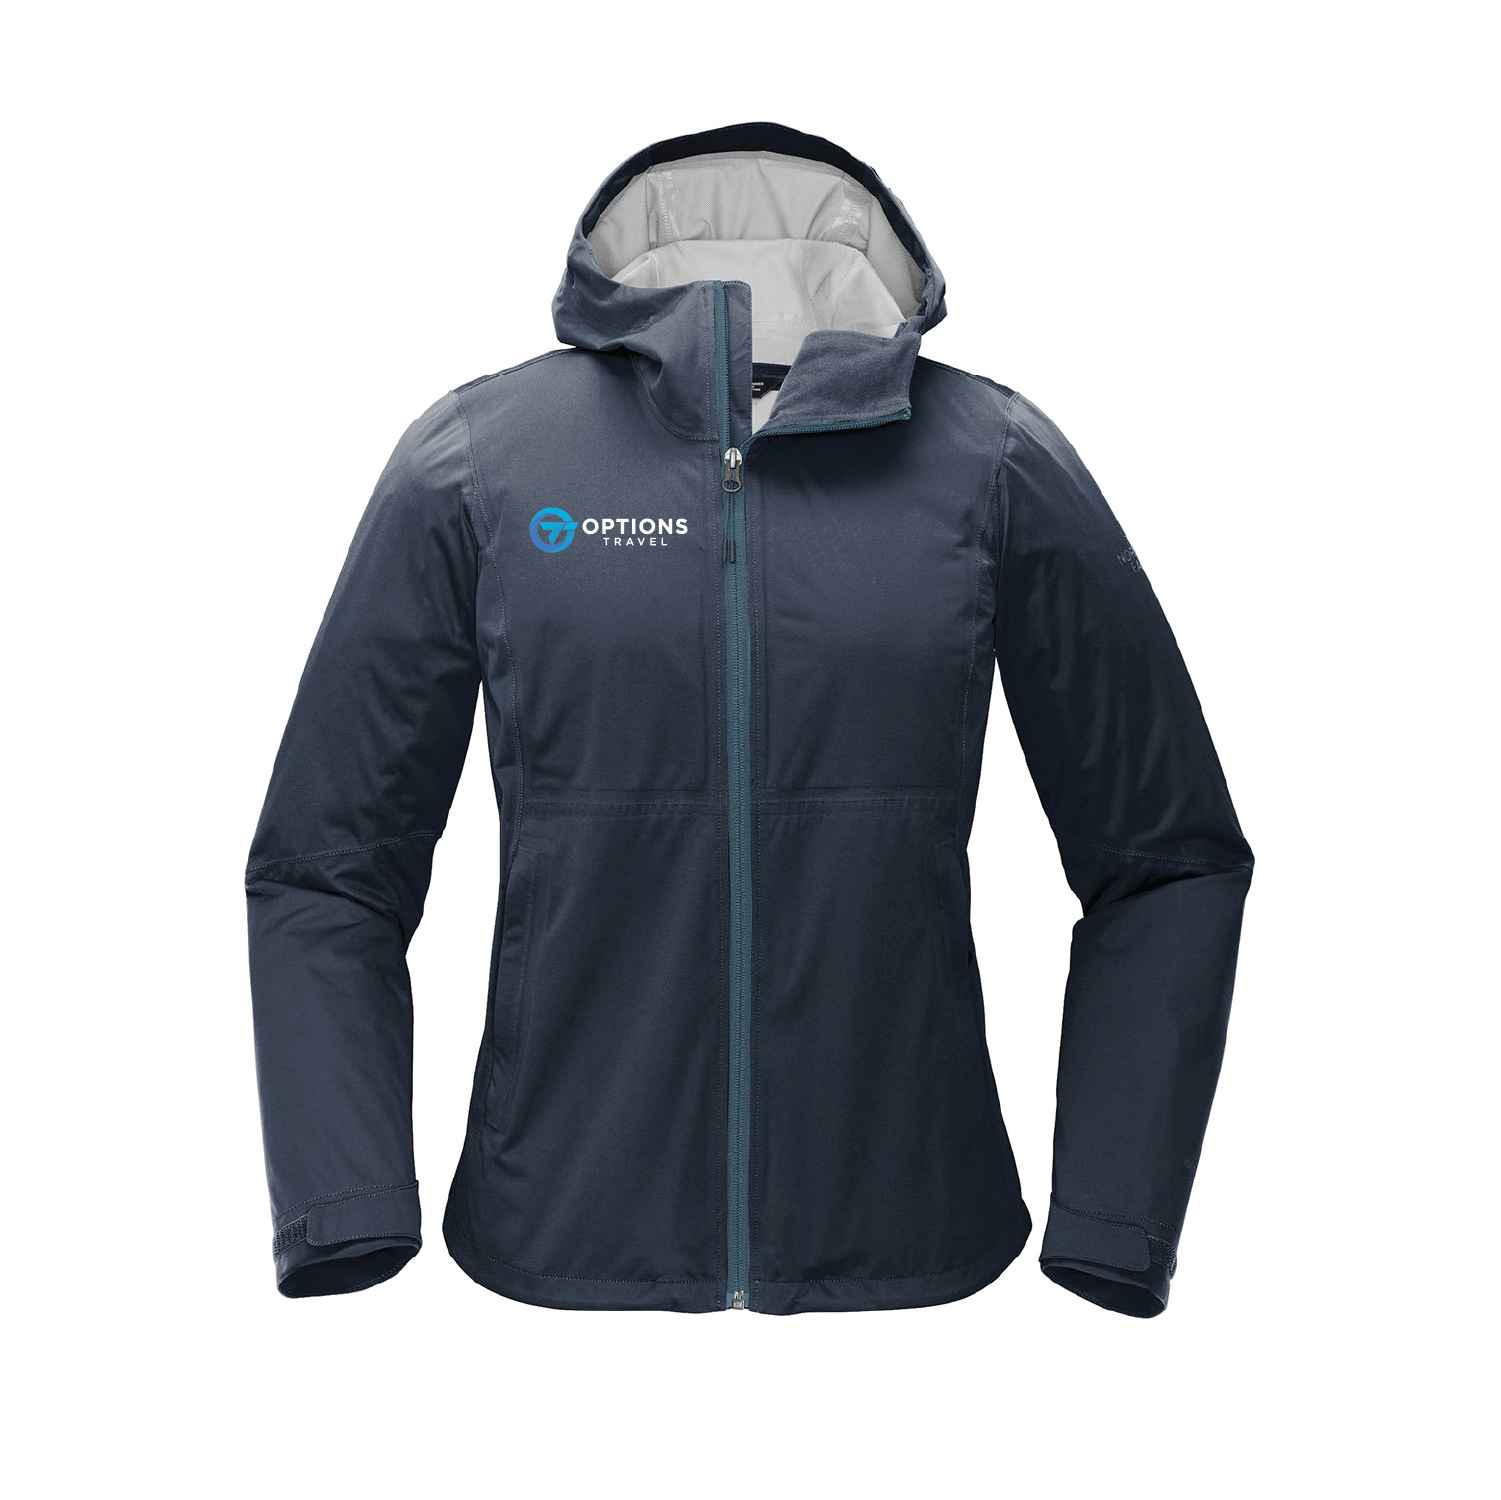 Options Travel The North Face ® Ladies All-Weather DryVent ™ Stretch Jacket - DSP On Demand